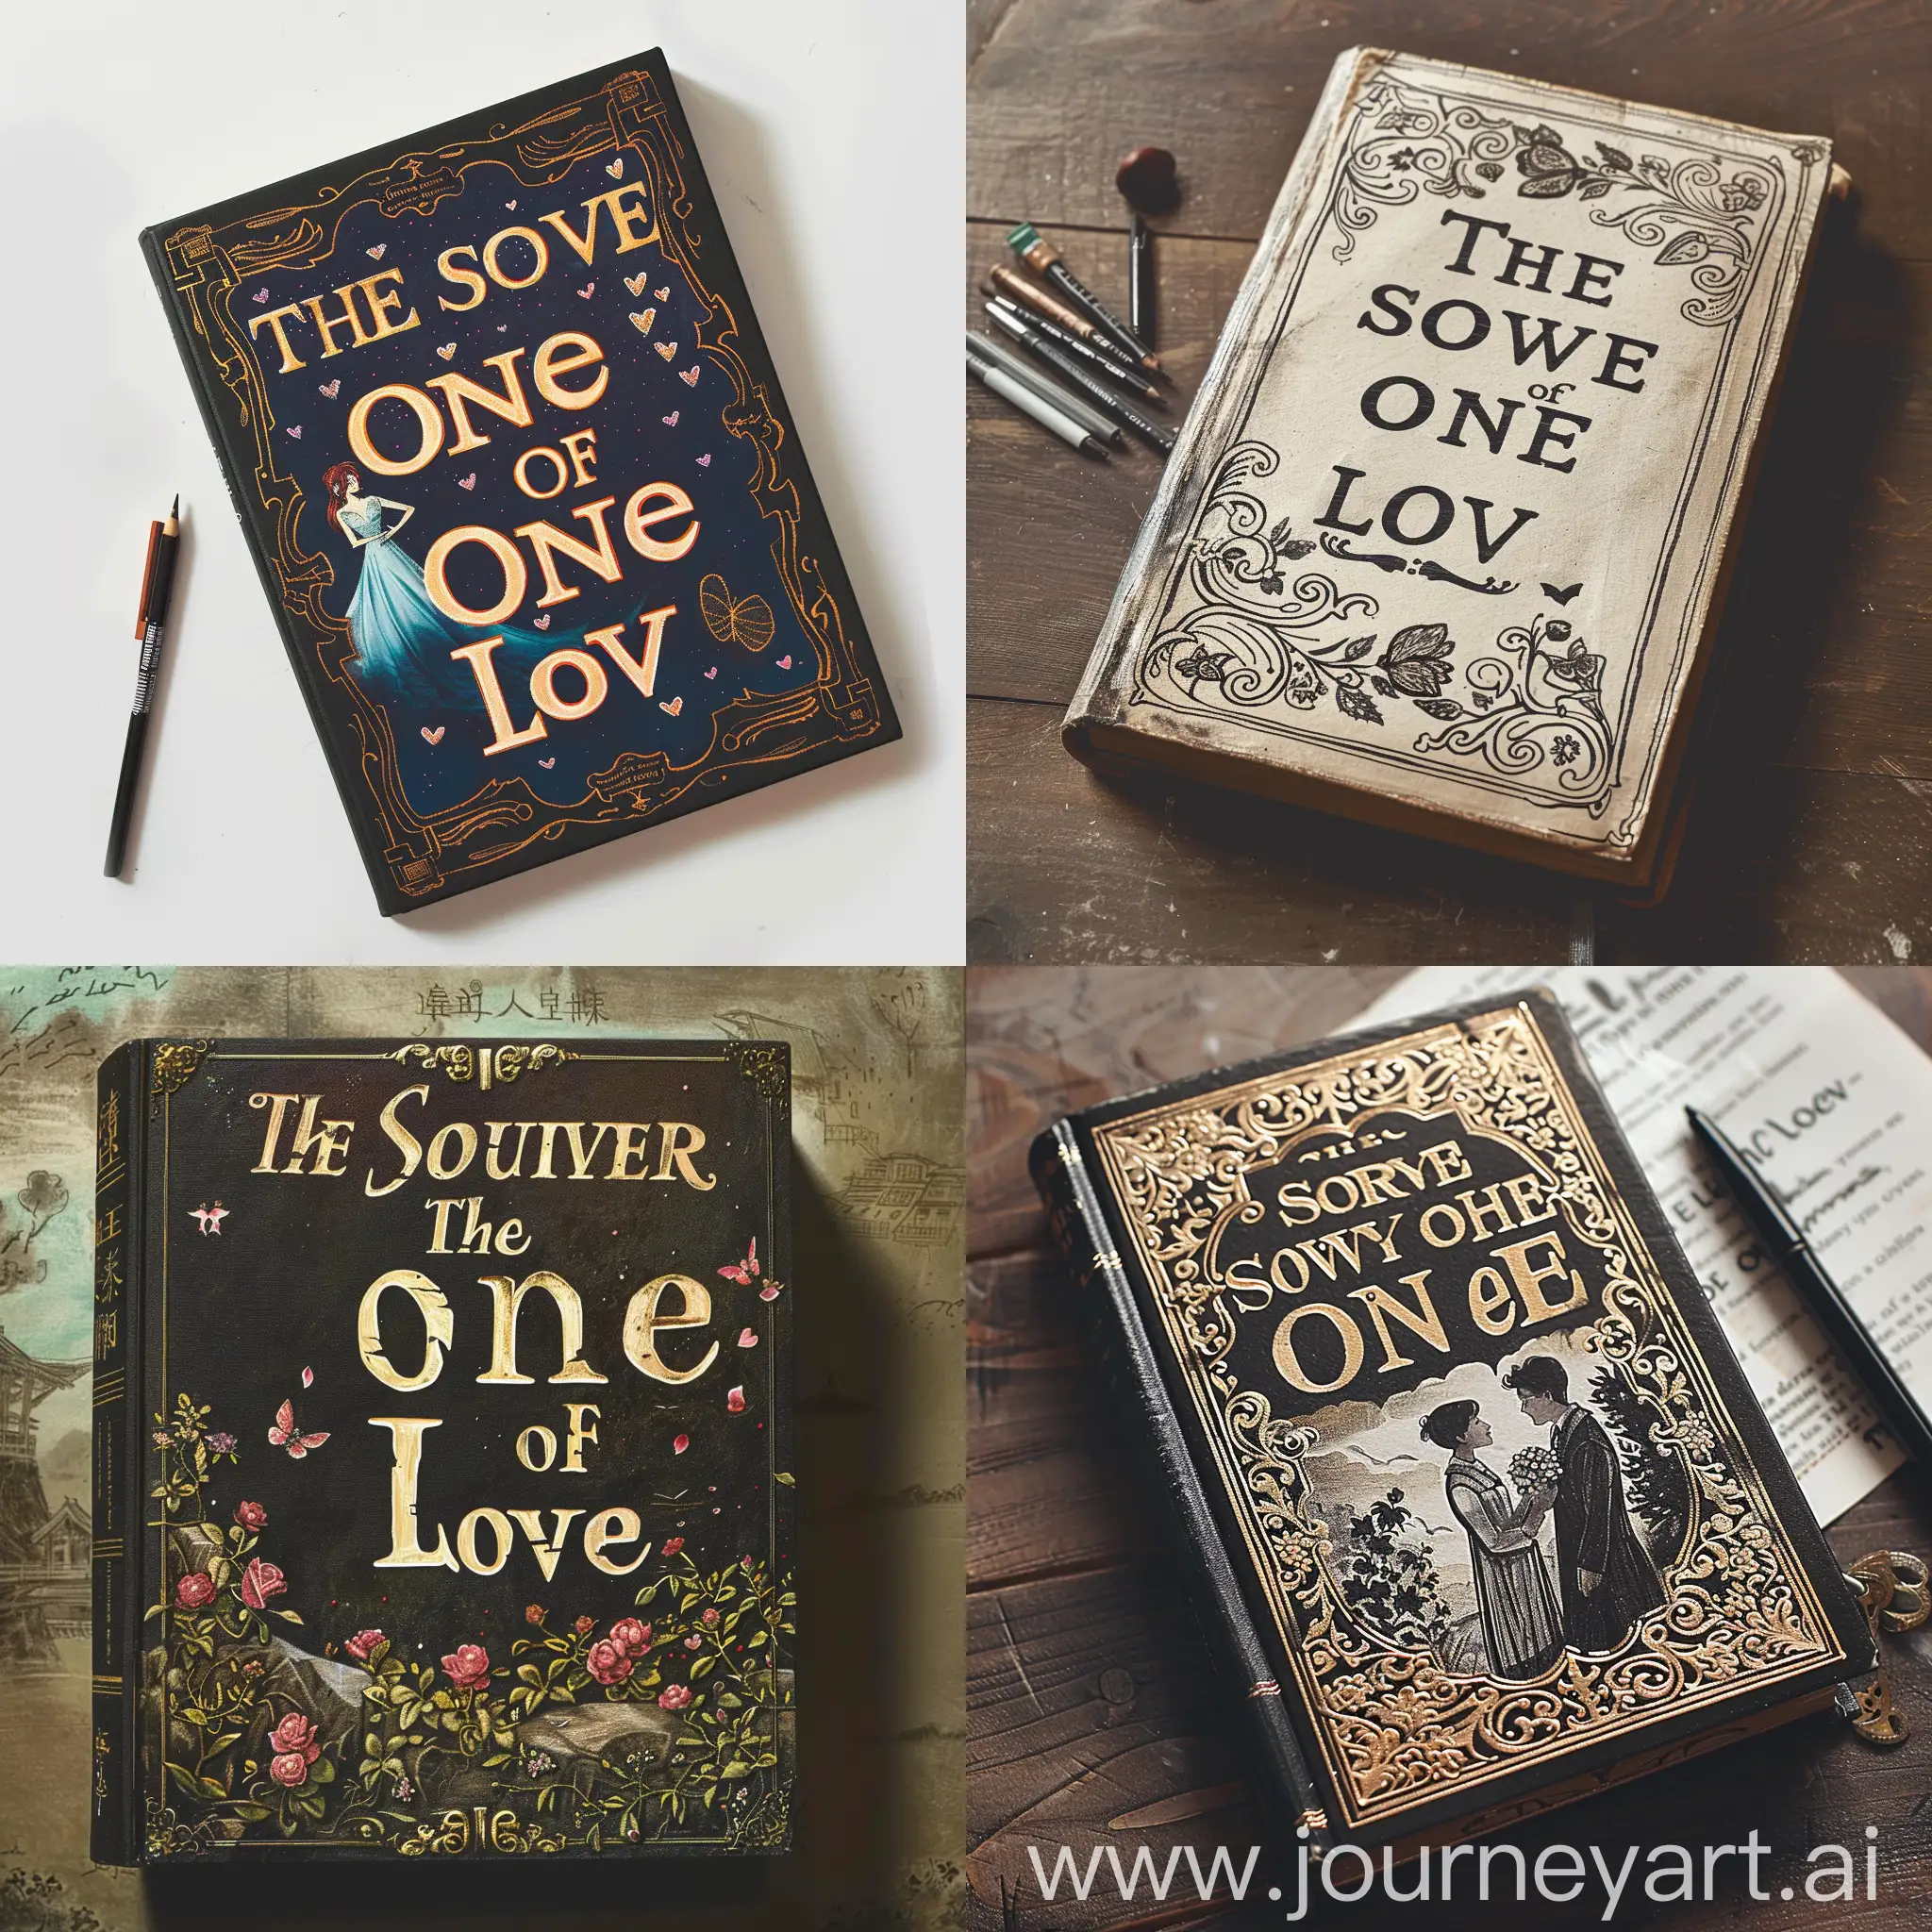 draw a sketch of the cover of the book "The Story of One Love"


